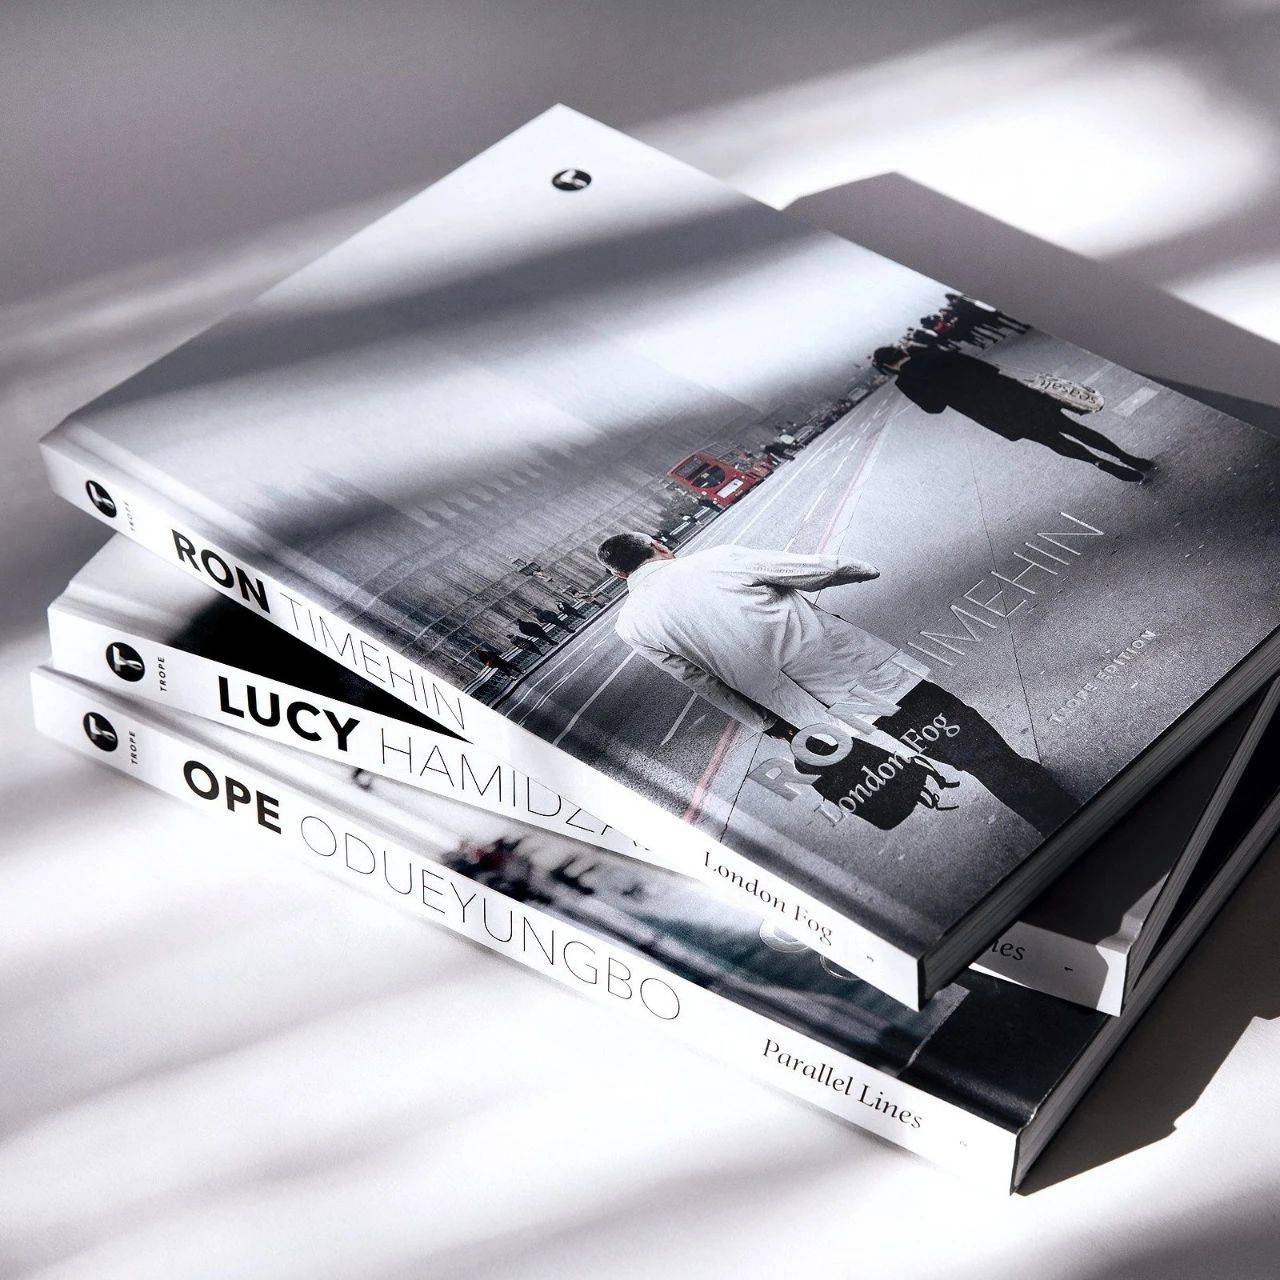 Thom Browne - The 20th Anniversary Book